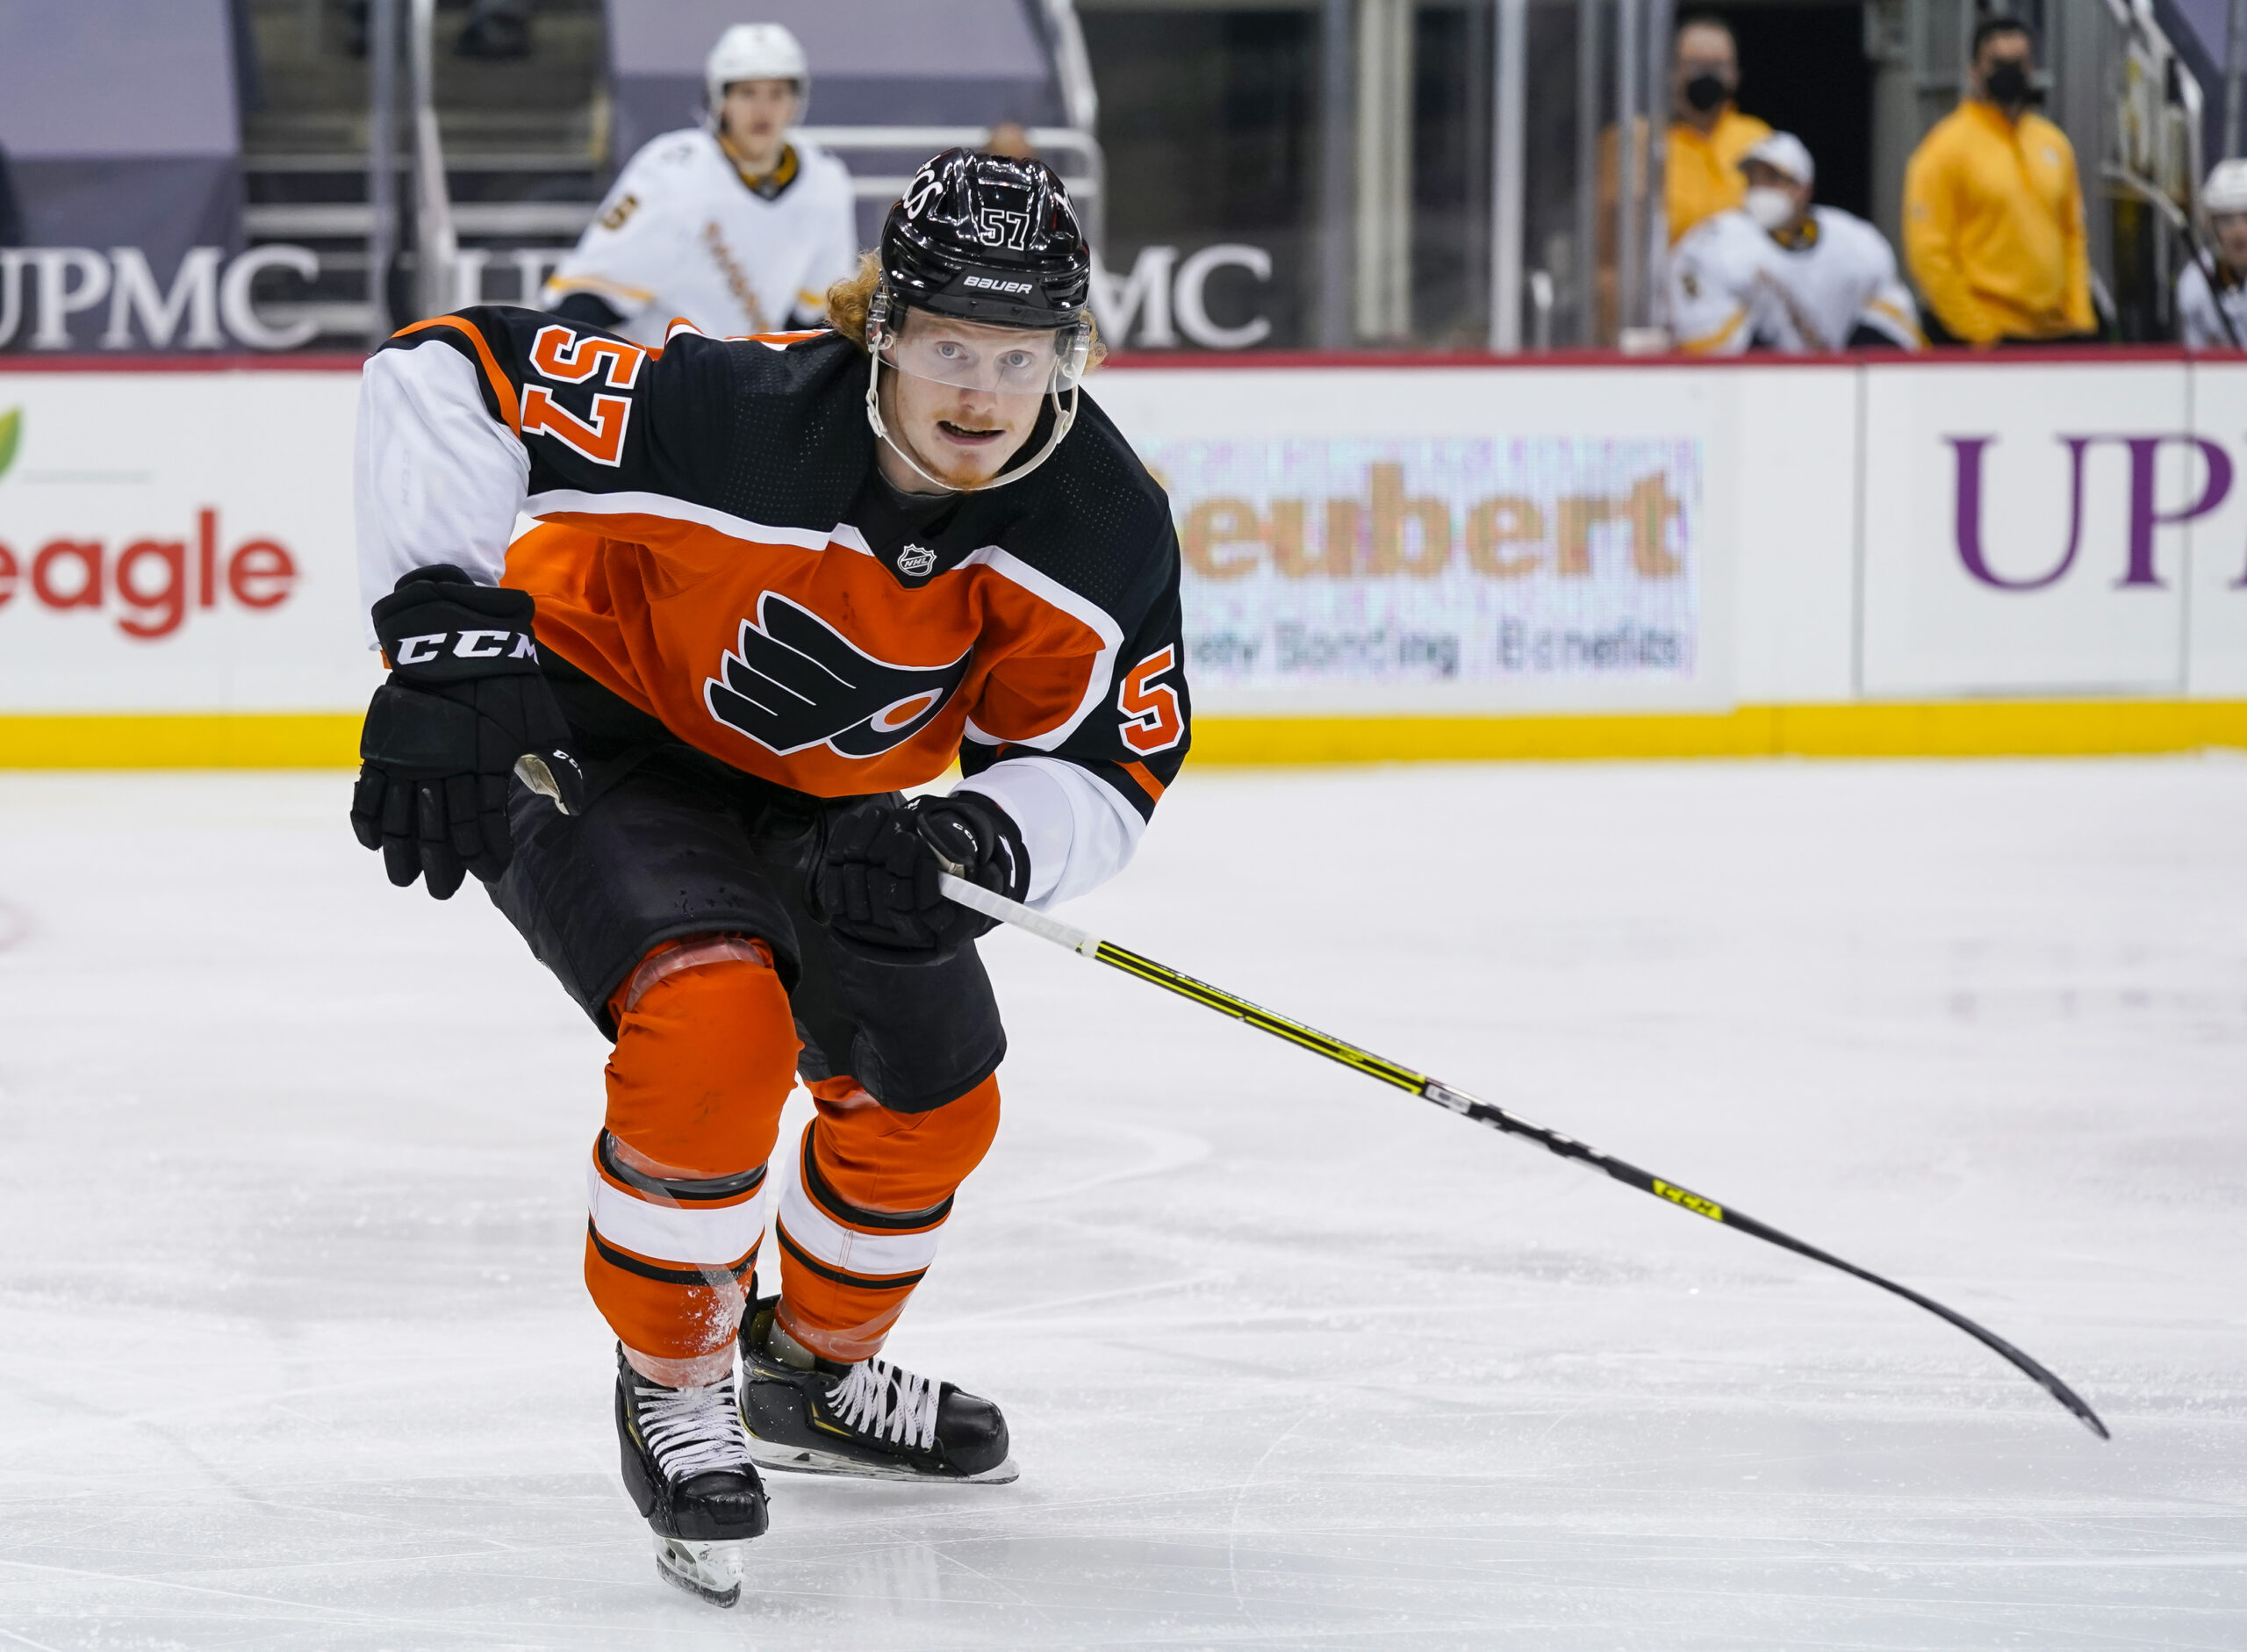 Wade Allison providing a spark for Flyers and getting rewarded for it